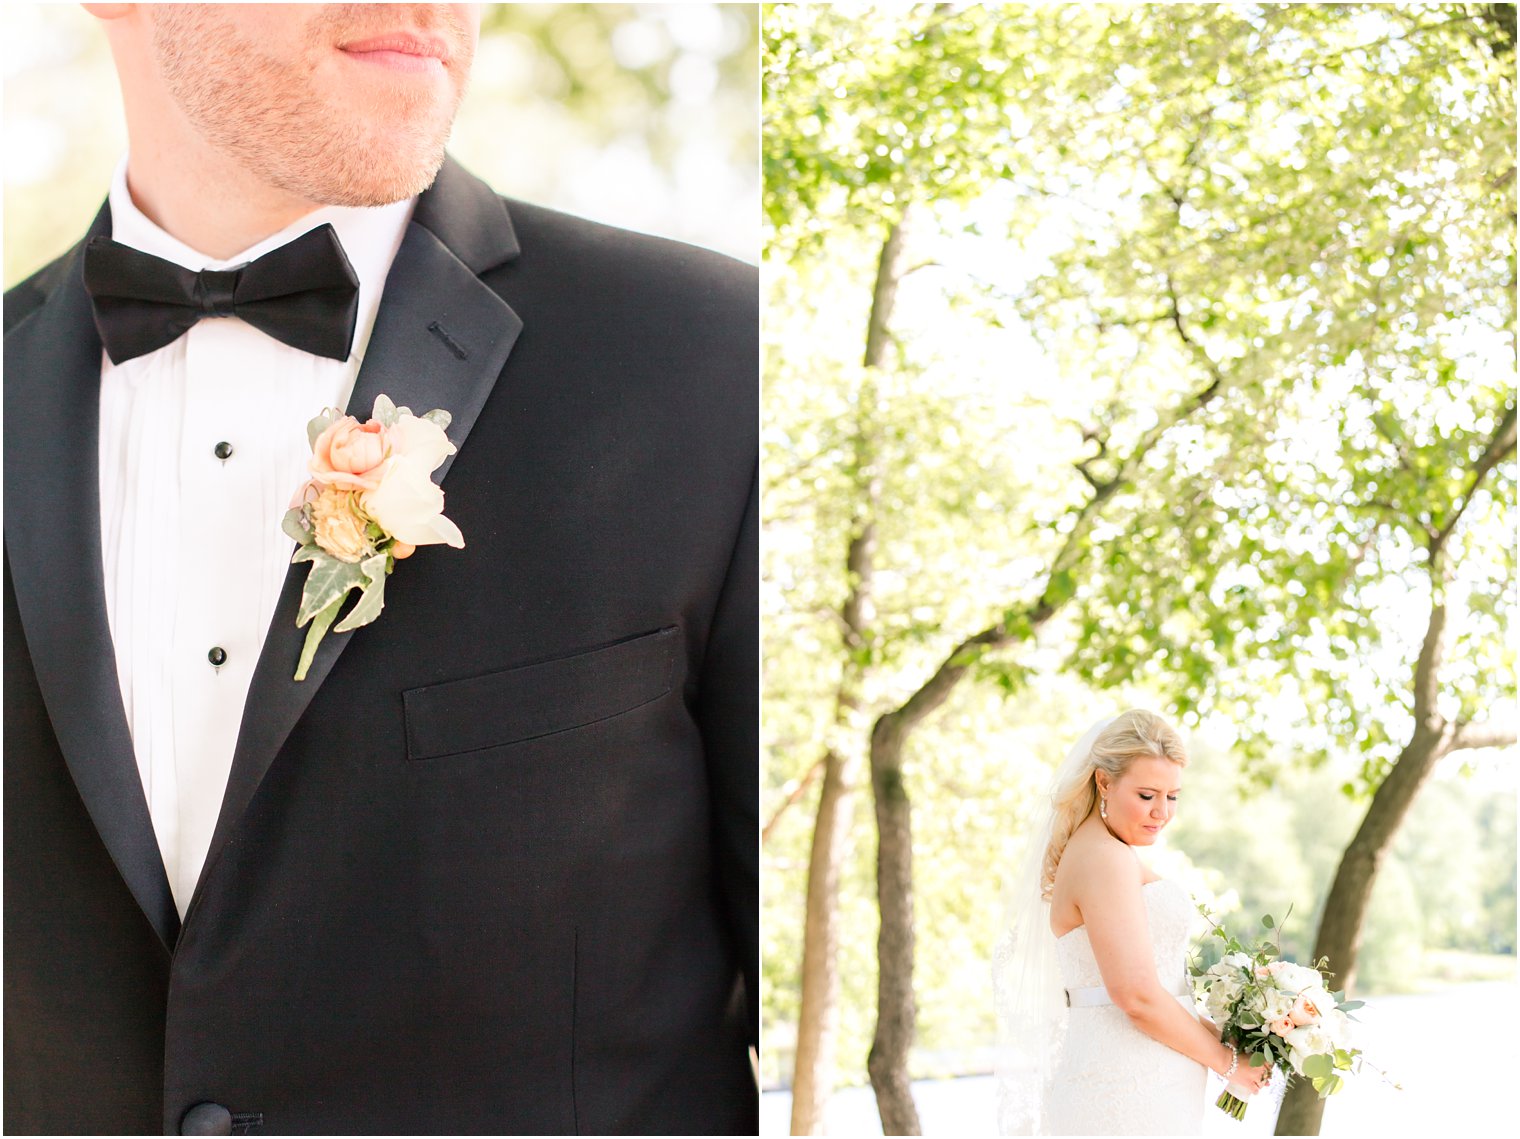 Boutonniere by Laurelwood Designs | Photos by Indian Trail Club Wedding Photographer Idalia Photography